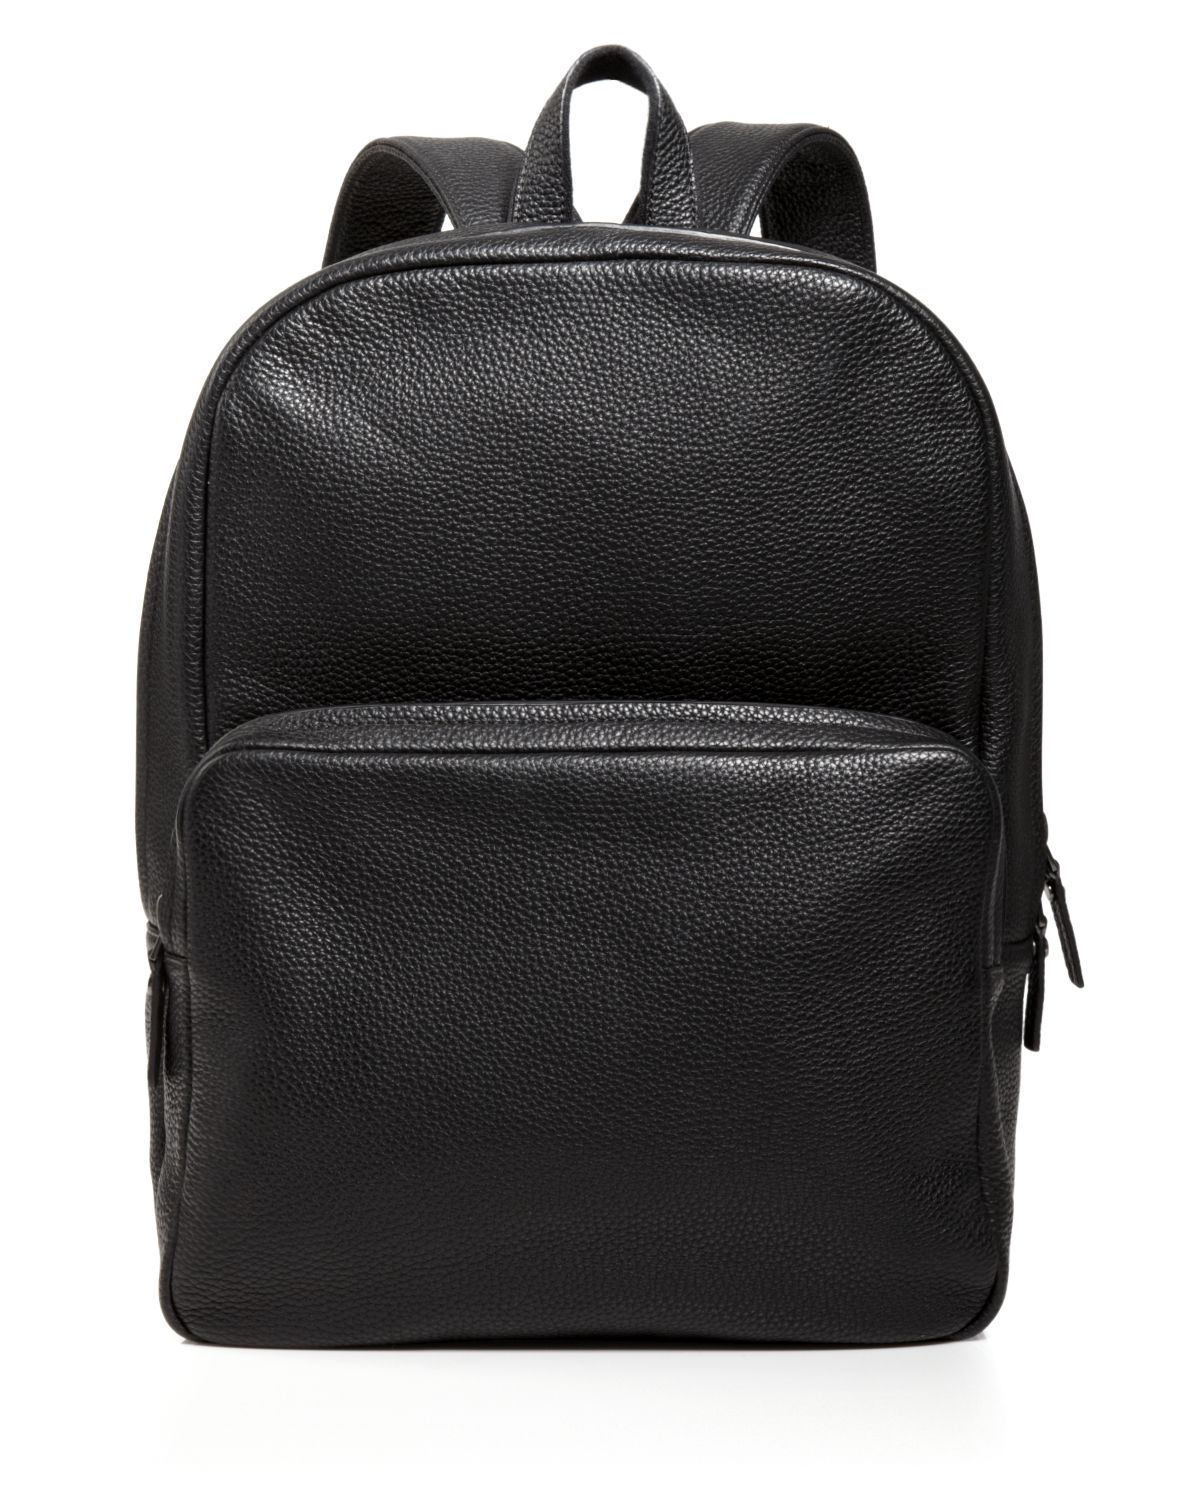 Lyst - Marc By Marc Jacobs Classic Leather Backpack in Black